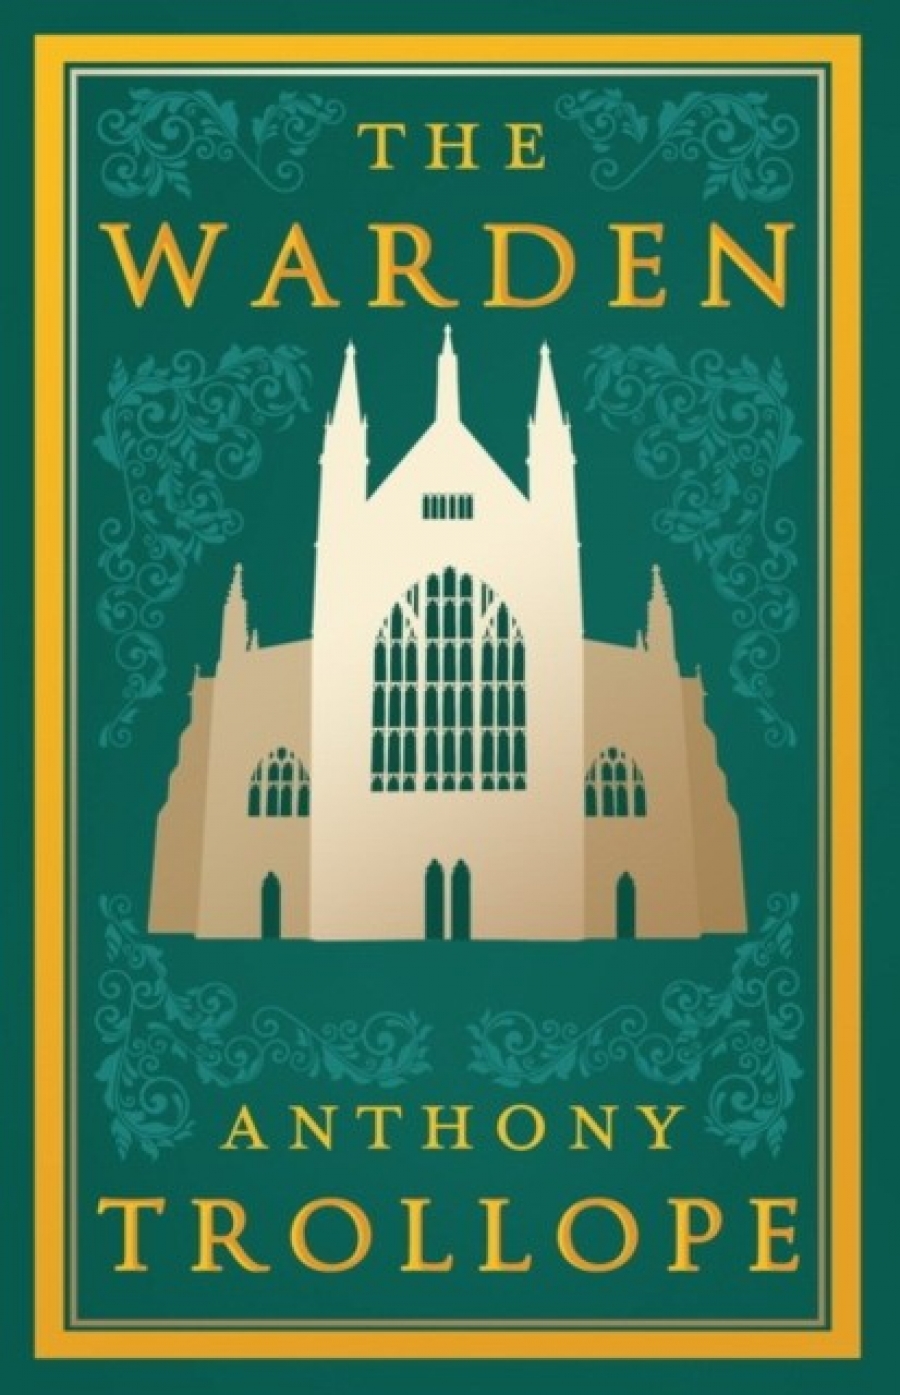 Trollope Anthony The Warden 